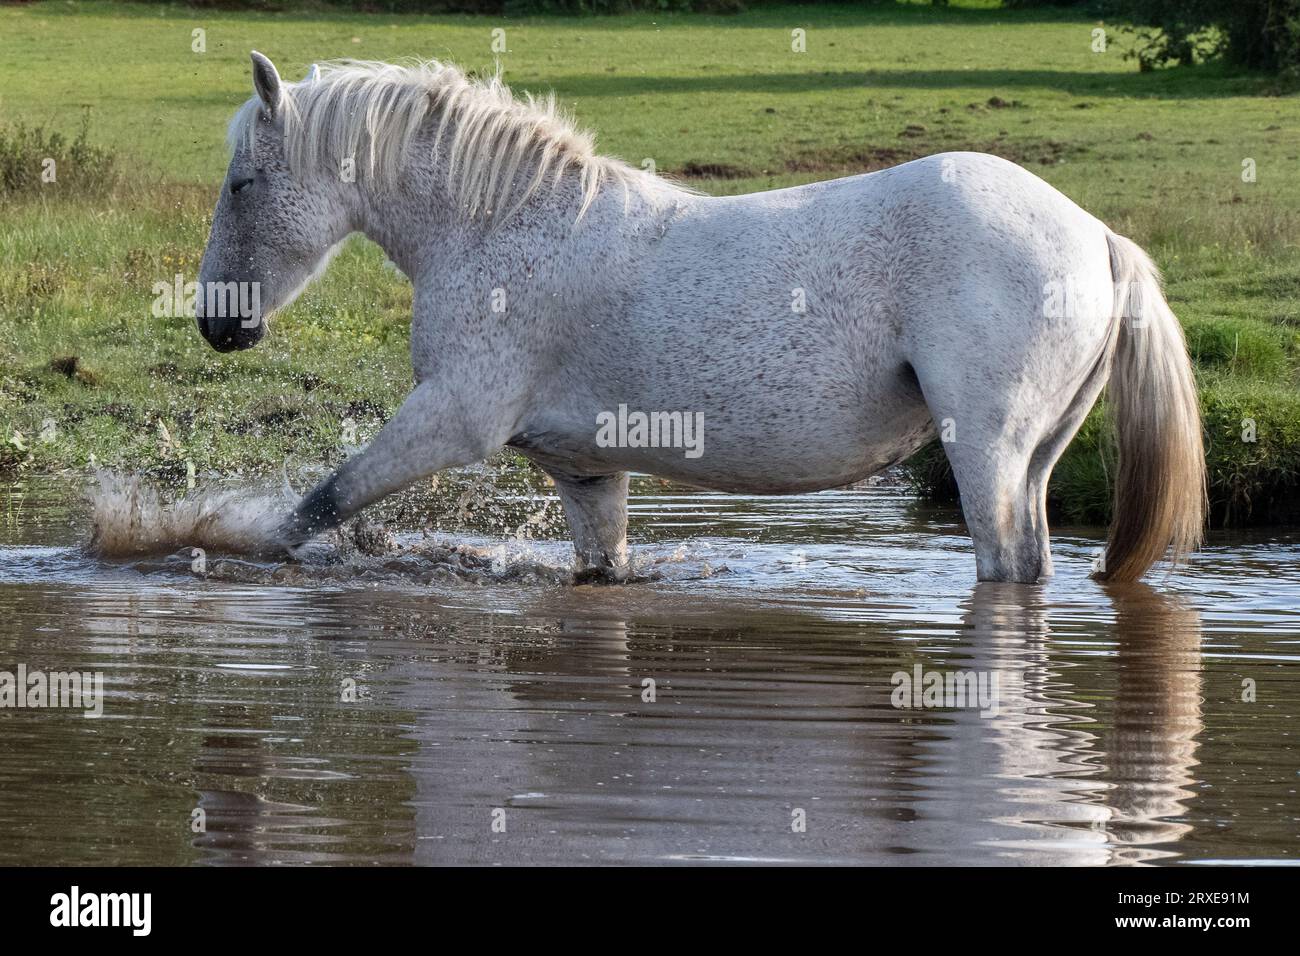 The New Forest National Park, Hampshire, Wild ponies roaming freely in their natural habitat, a grey pony cooling down and covering itself in mud Stock Photo